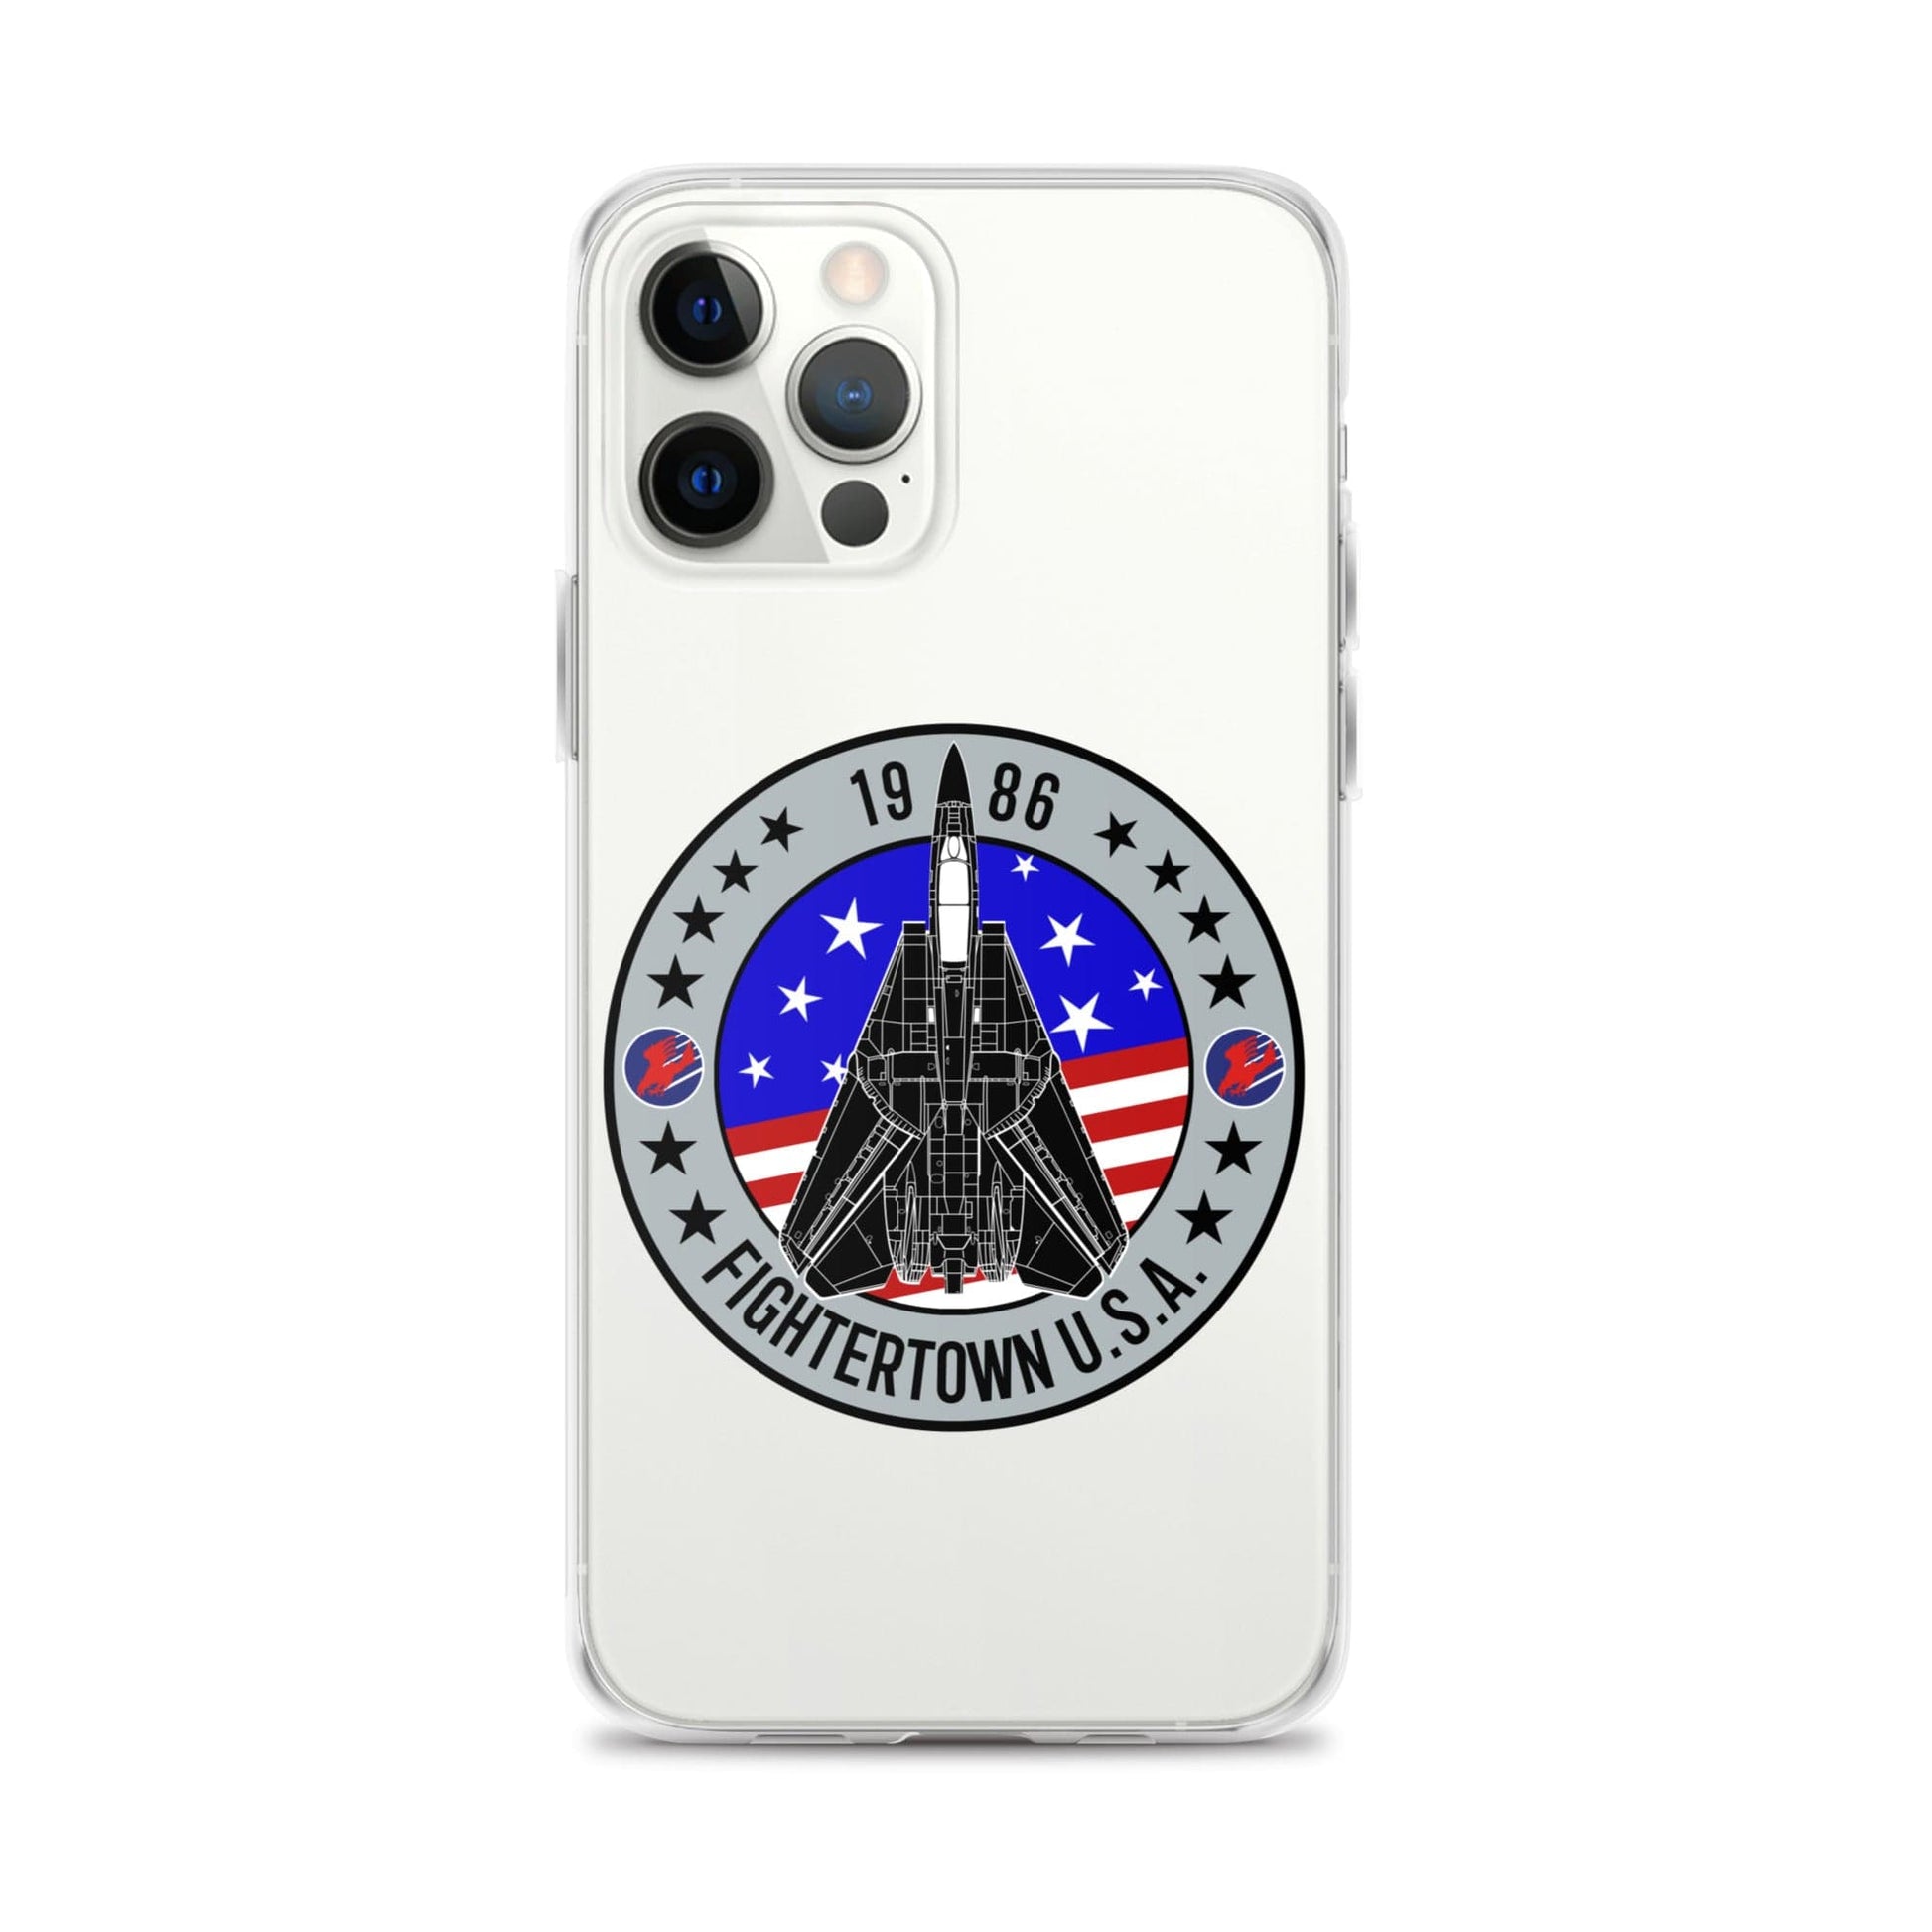 Top Gun Fans Mobile Phone Cases iPhone 12 Pro Max F-14 Tomcat Fightertown Clear iPhone Case